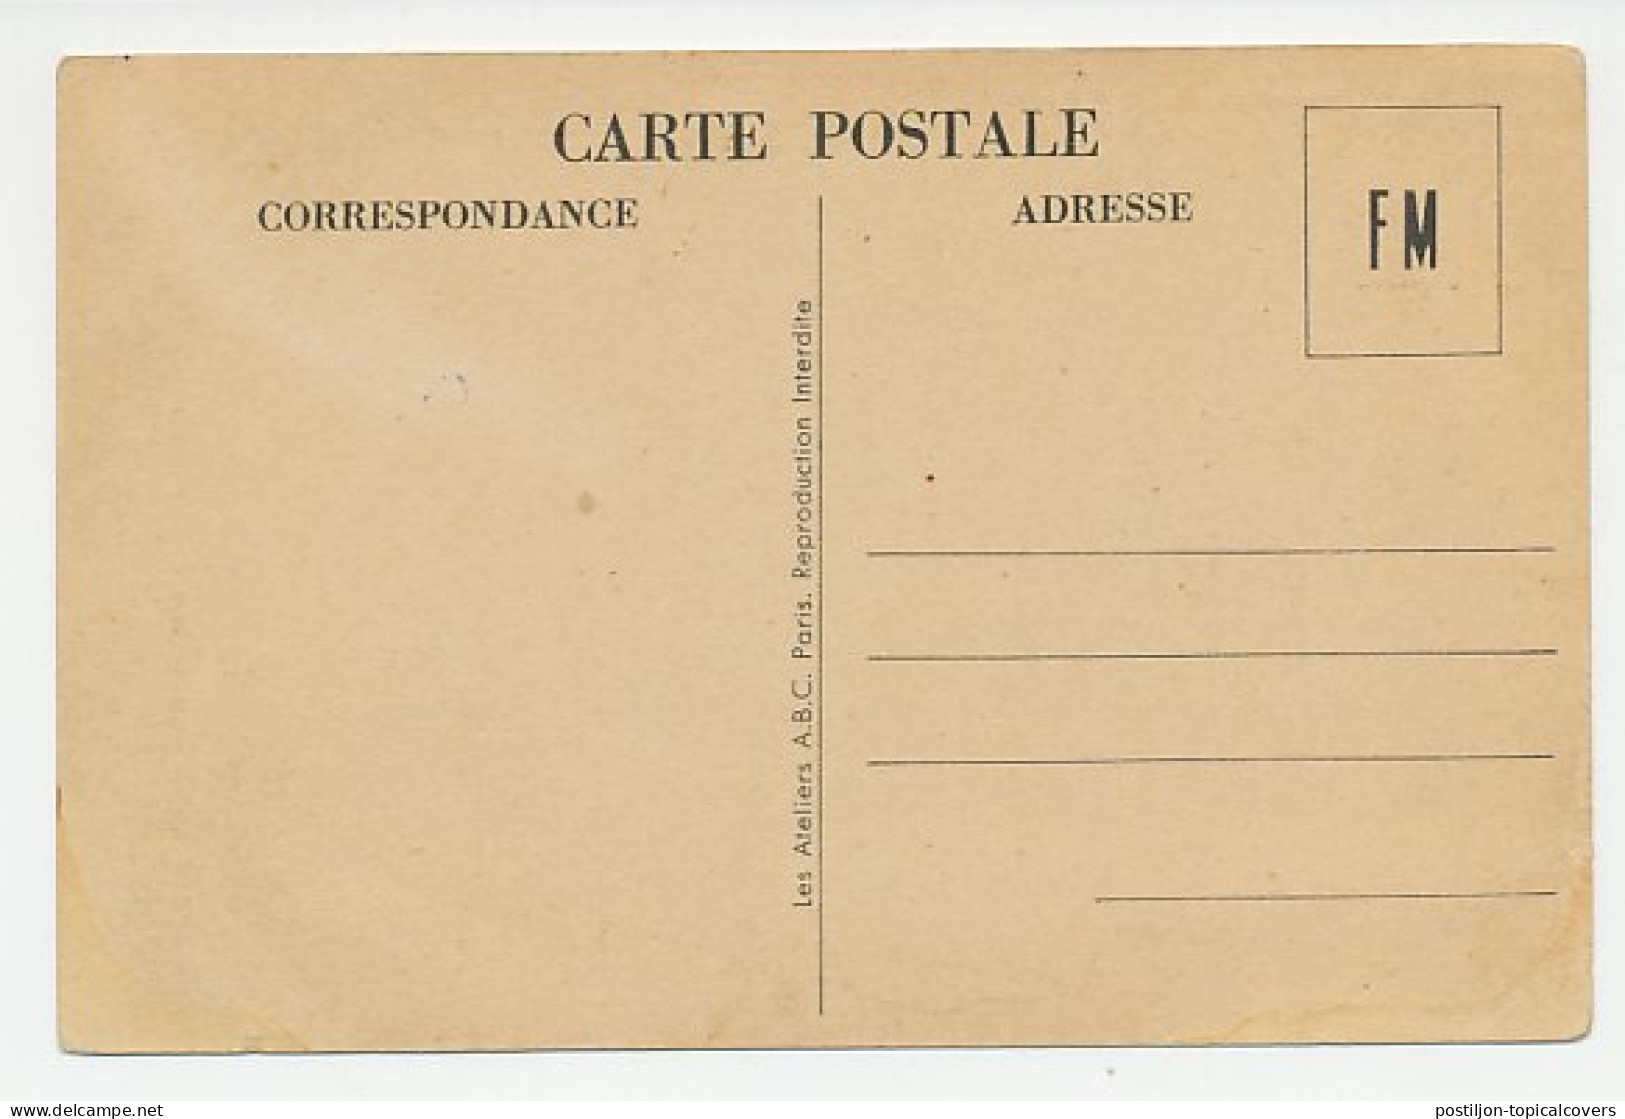 Military Service Card France Pipe Smoking - WWII - Tobacco